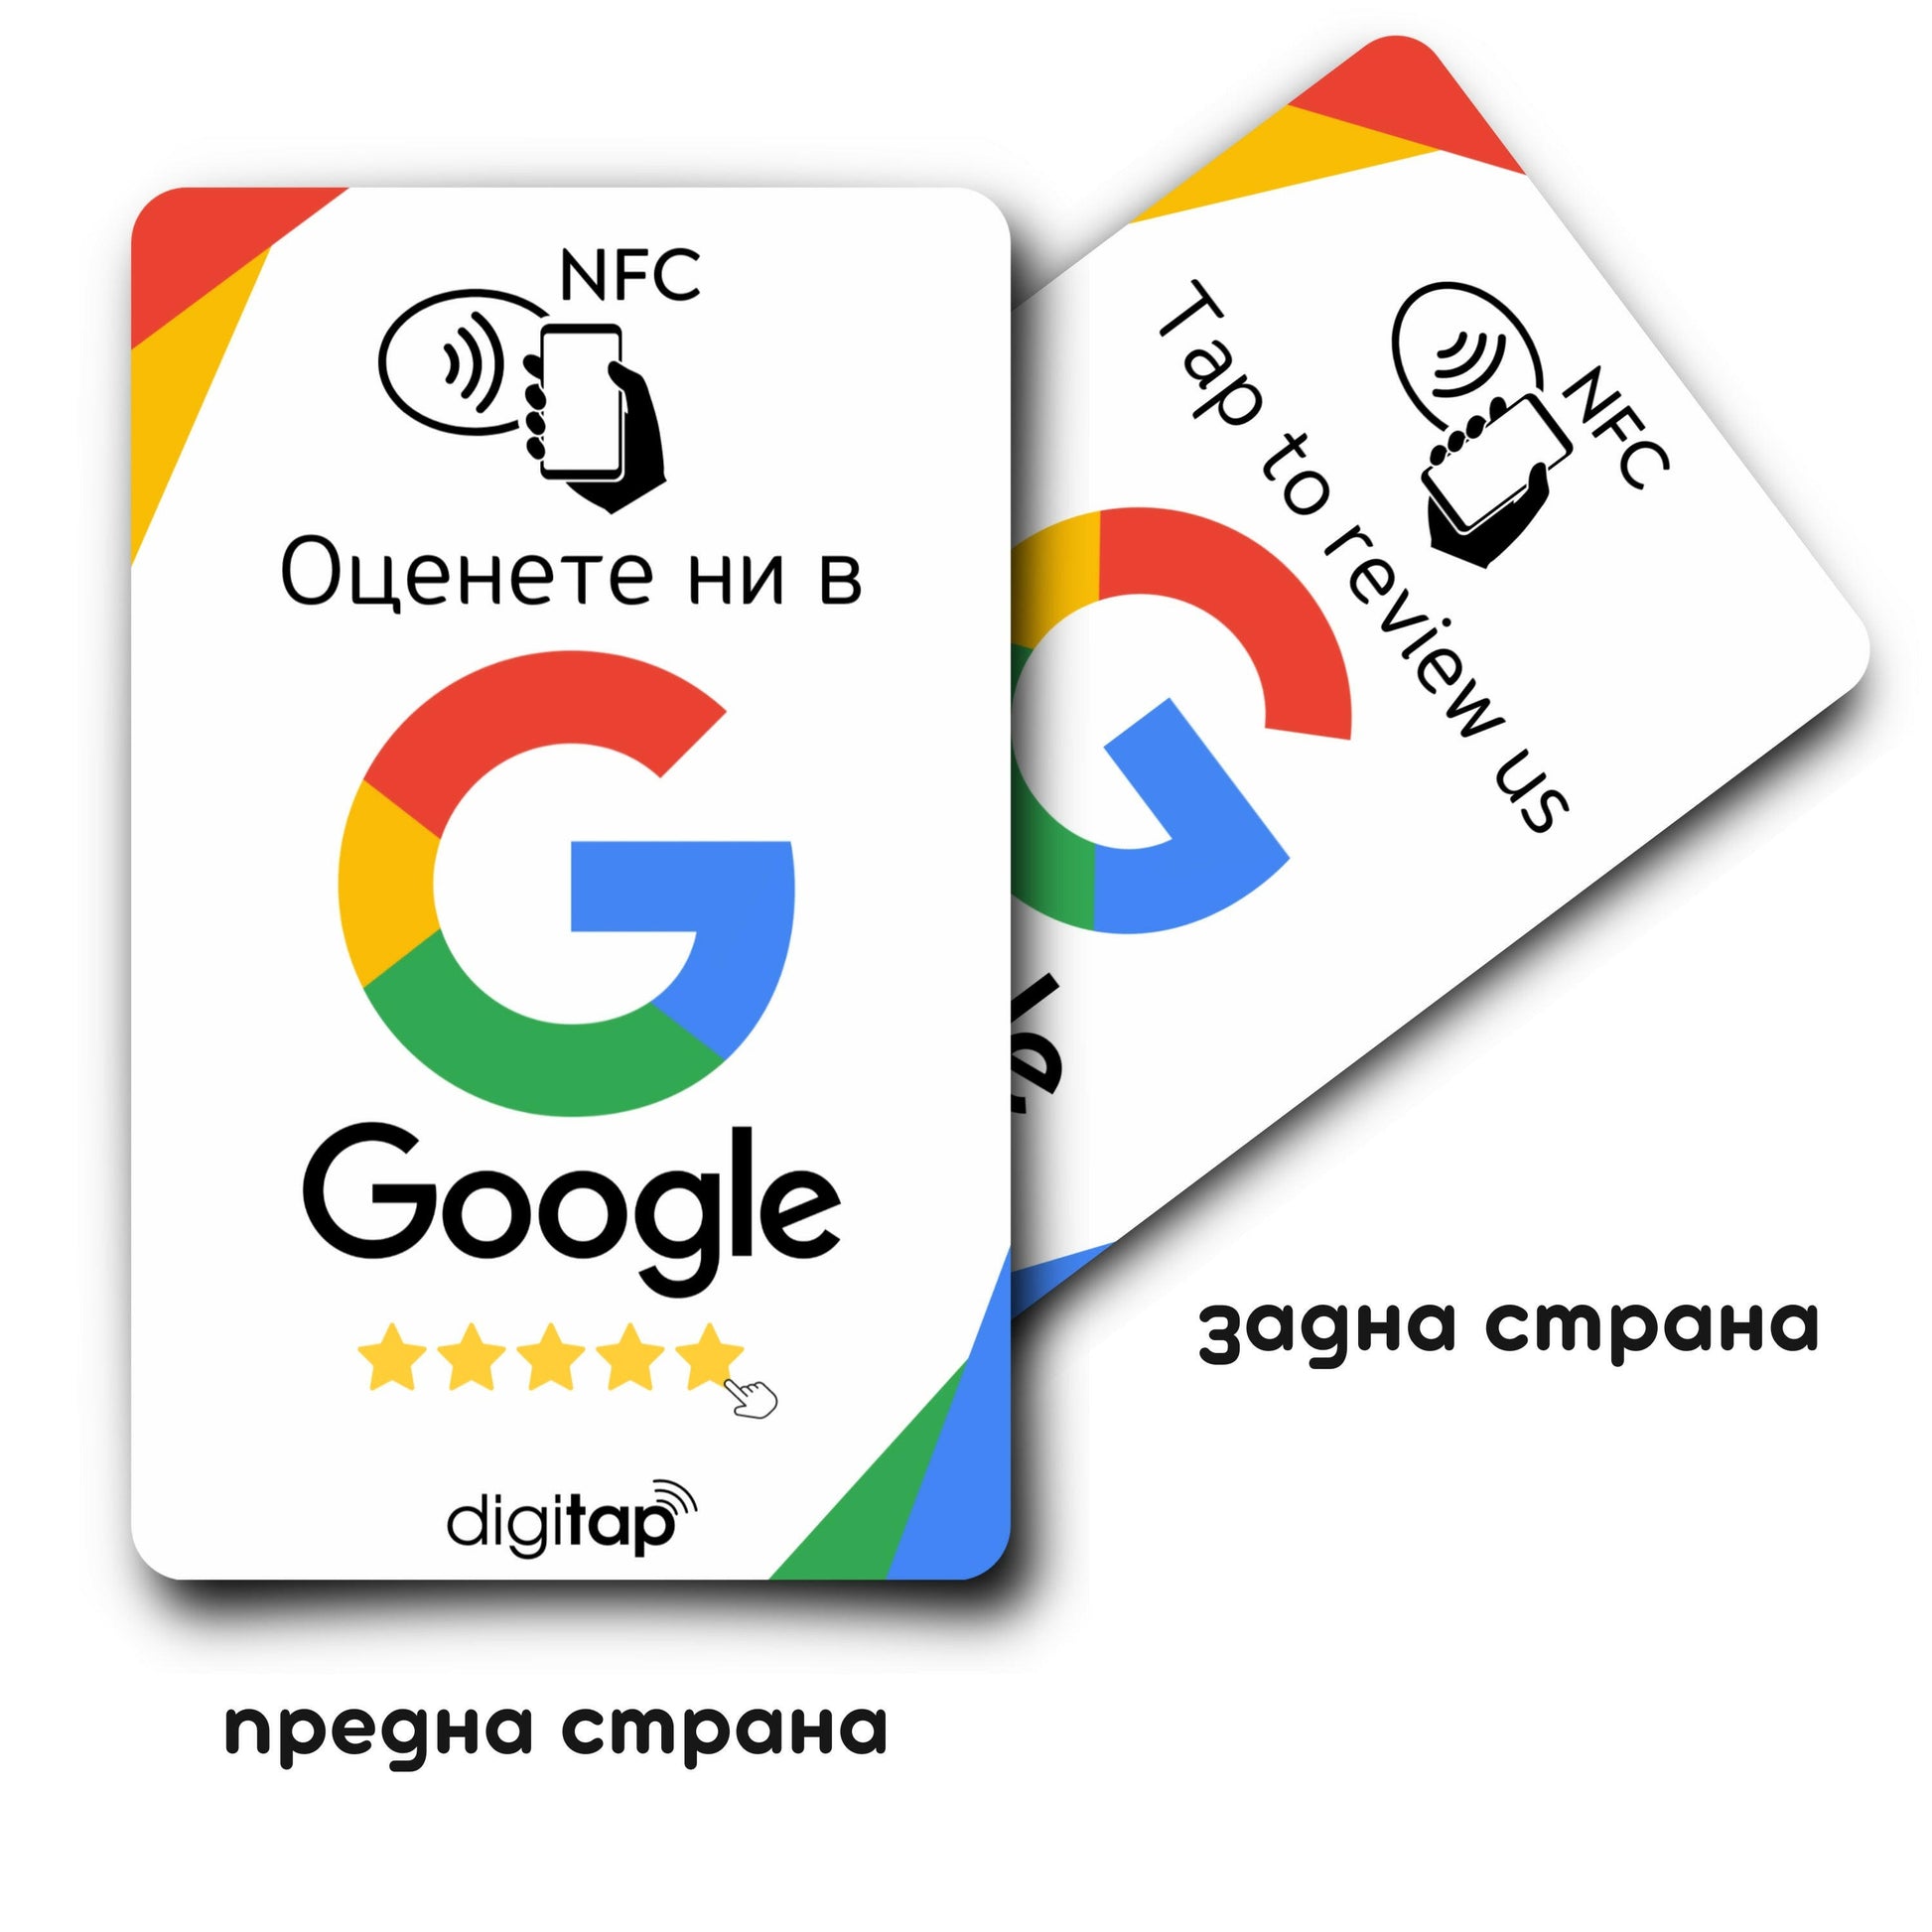 Digitap front and back card